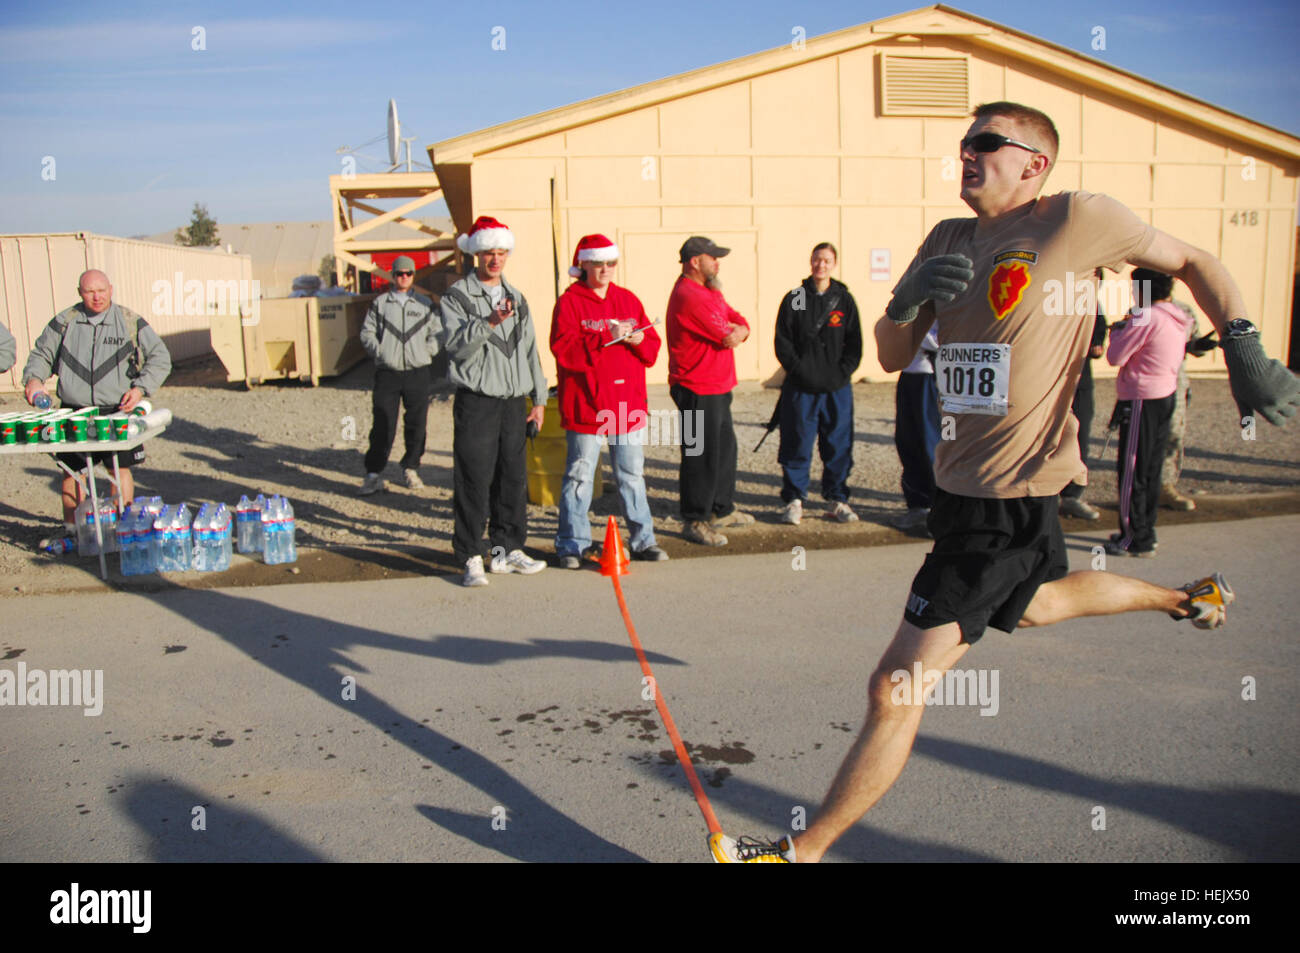 U.S. Army soldier competes in the 4.25 holdiay run, Forward Operating Base Salerno, Khowst Province, Afghanistan, Dec. 25. The first place winner of the race with a finishing time of 26:07 was U.S. Marine Corps Maj. Jeff O' Donnel. 4.25 Holiday Run 234835 Stock Photo